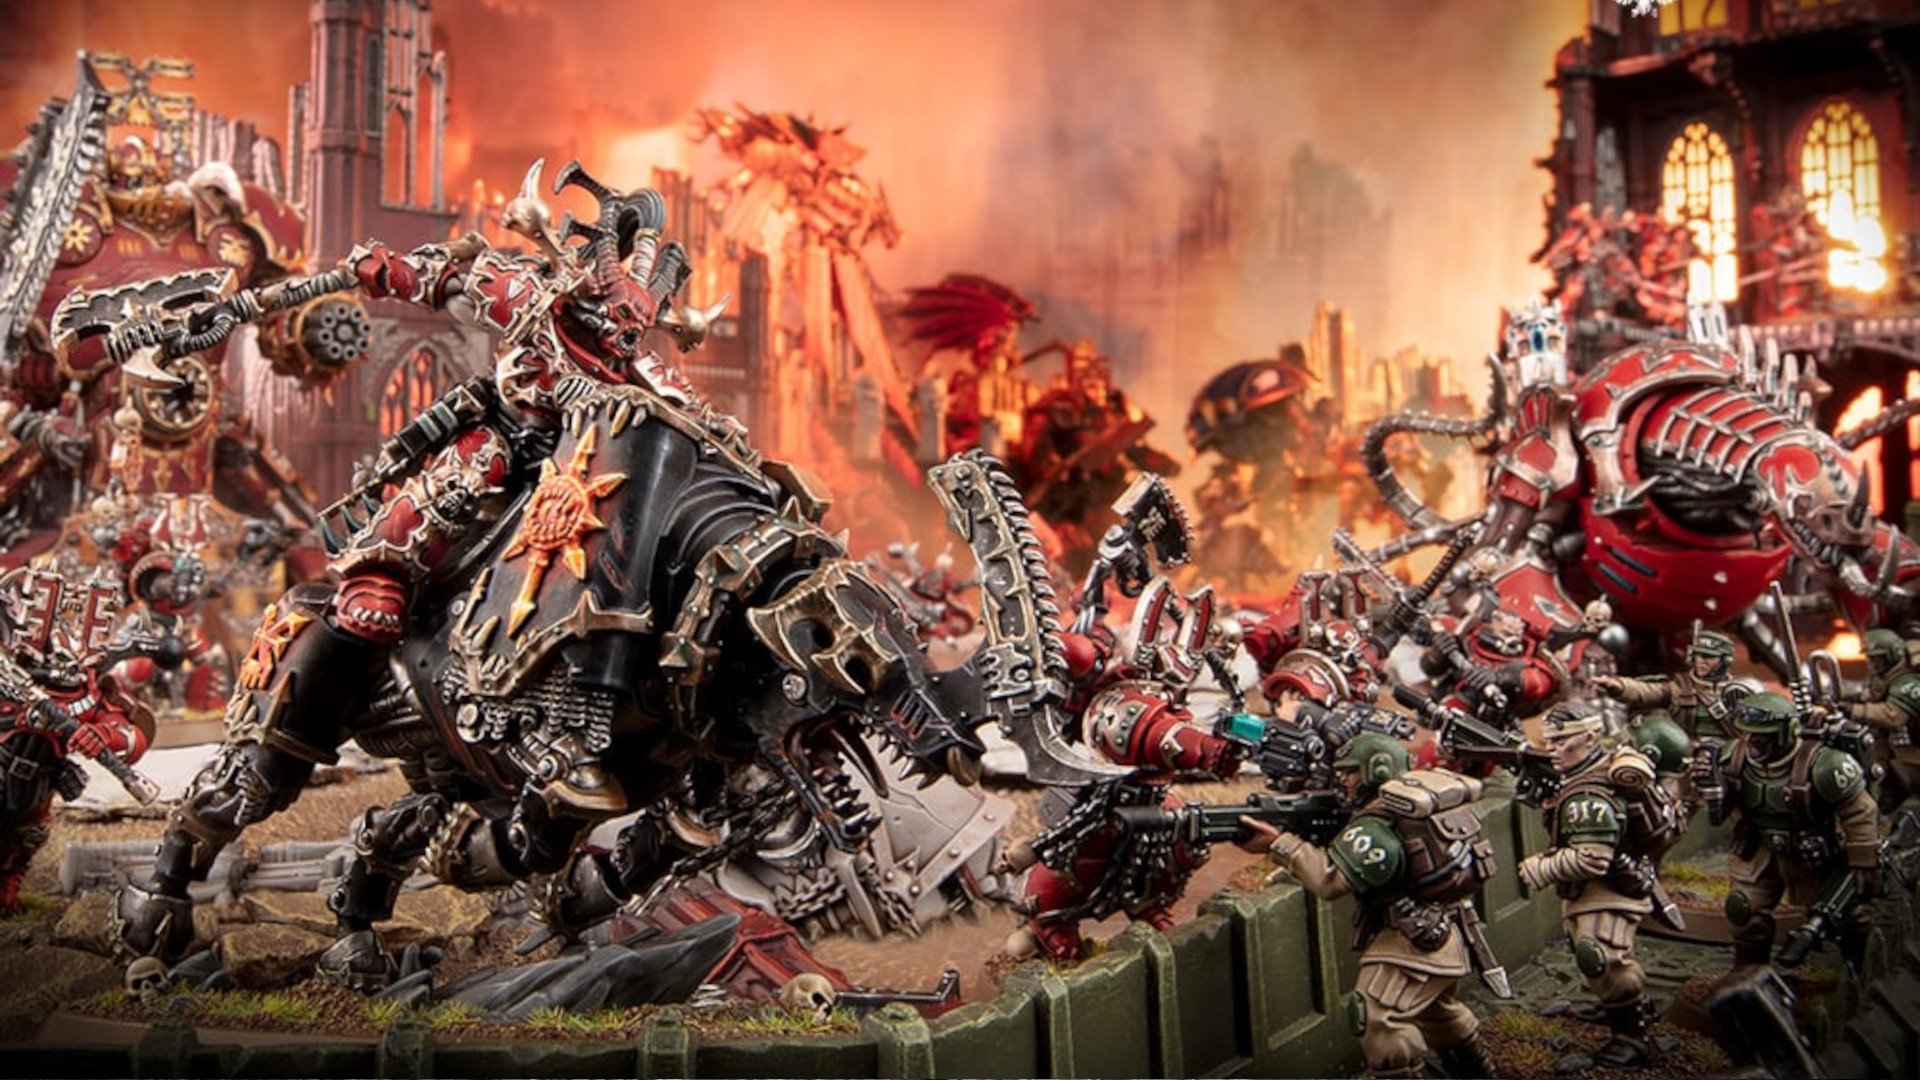 Warhammer 40k World Eaters Codex Review - Lord Invocatus, a red armored warrior riding a black daemonic iron rhino, charges